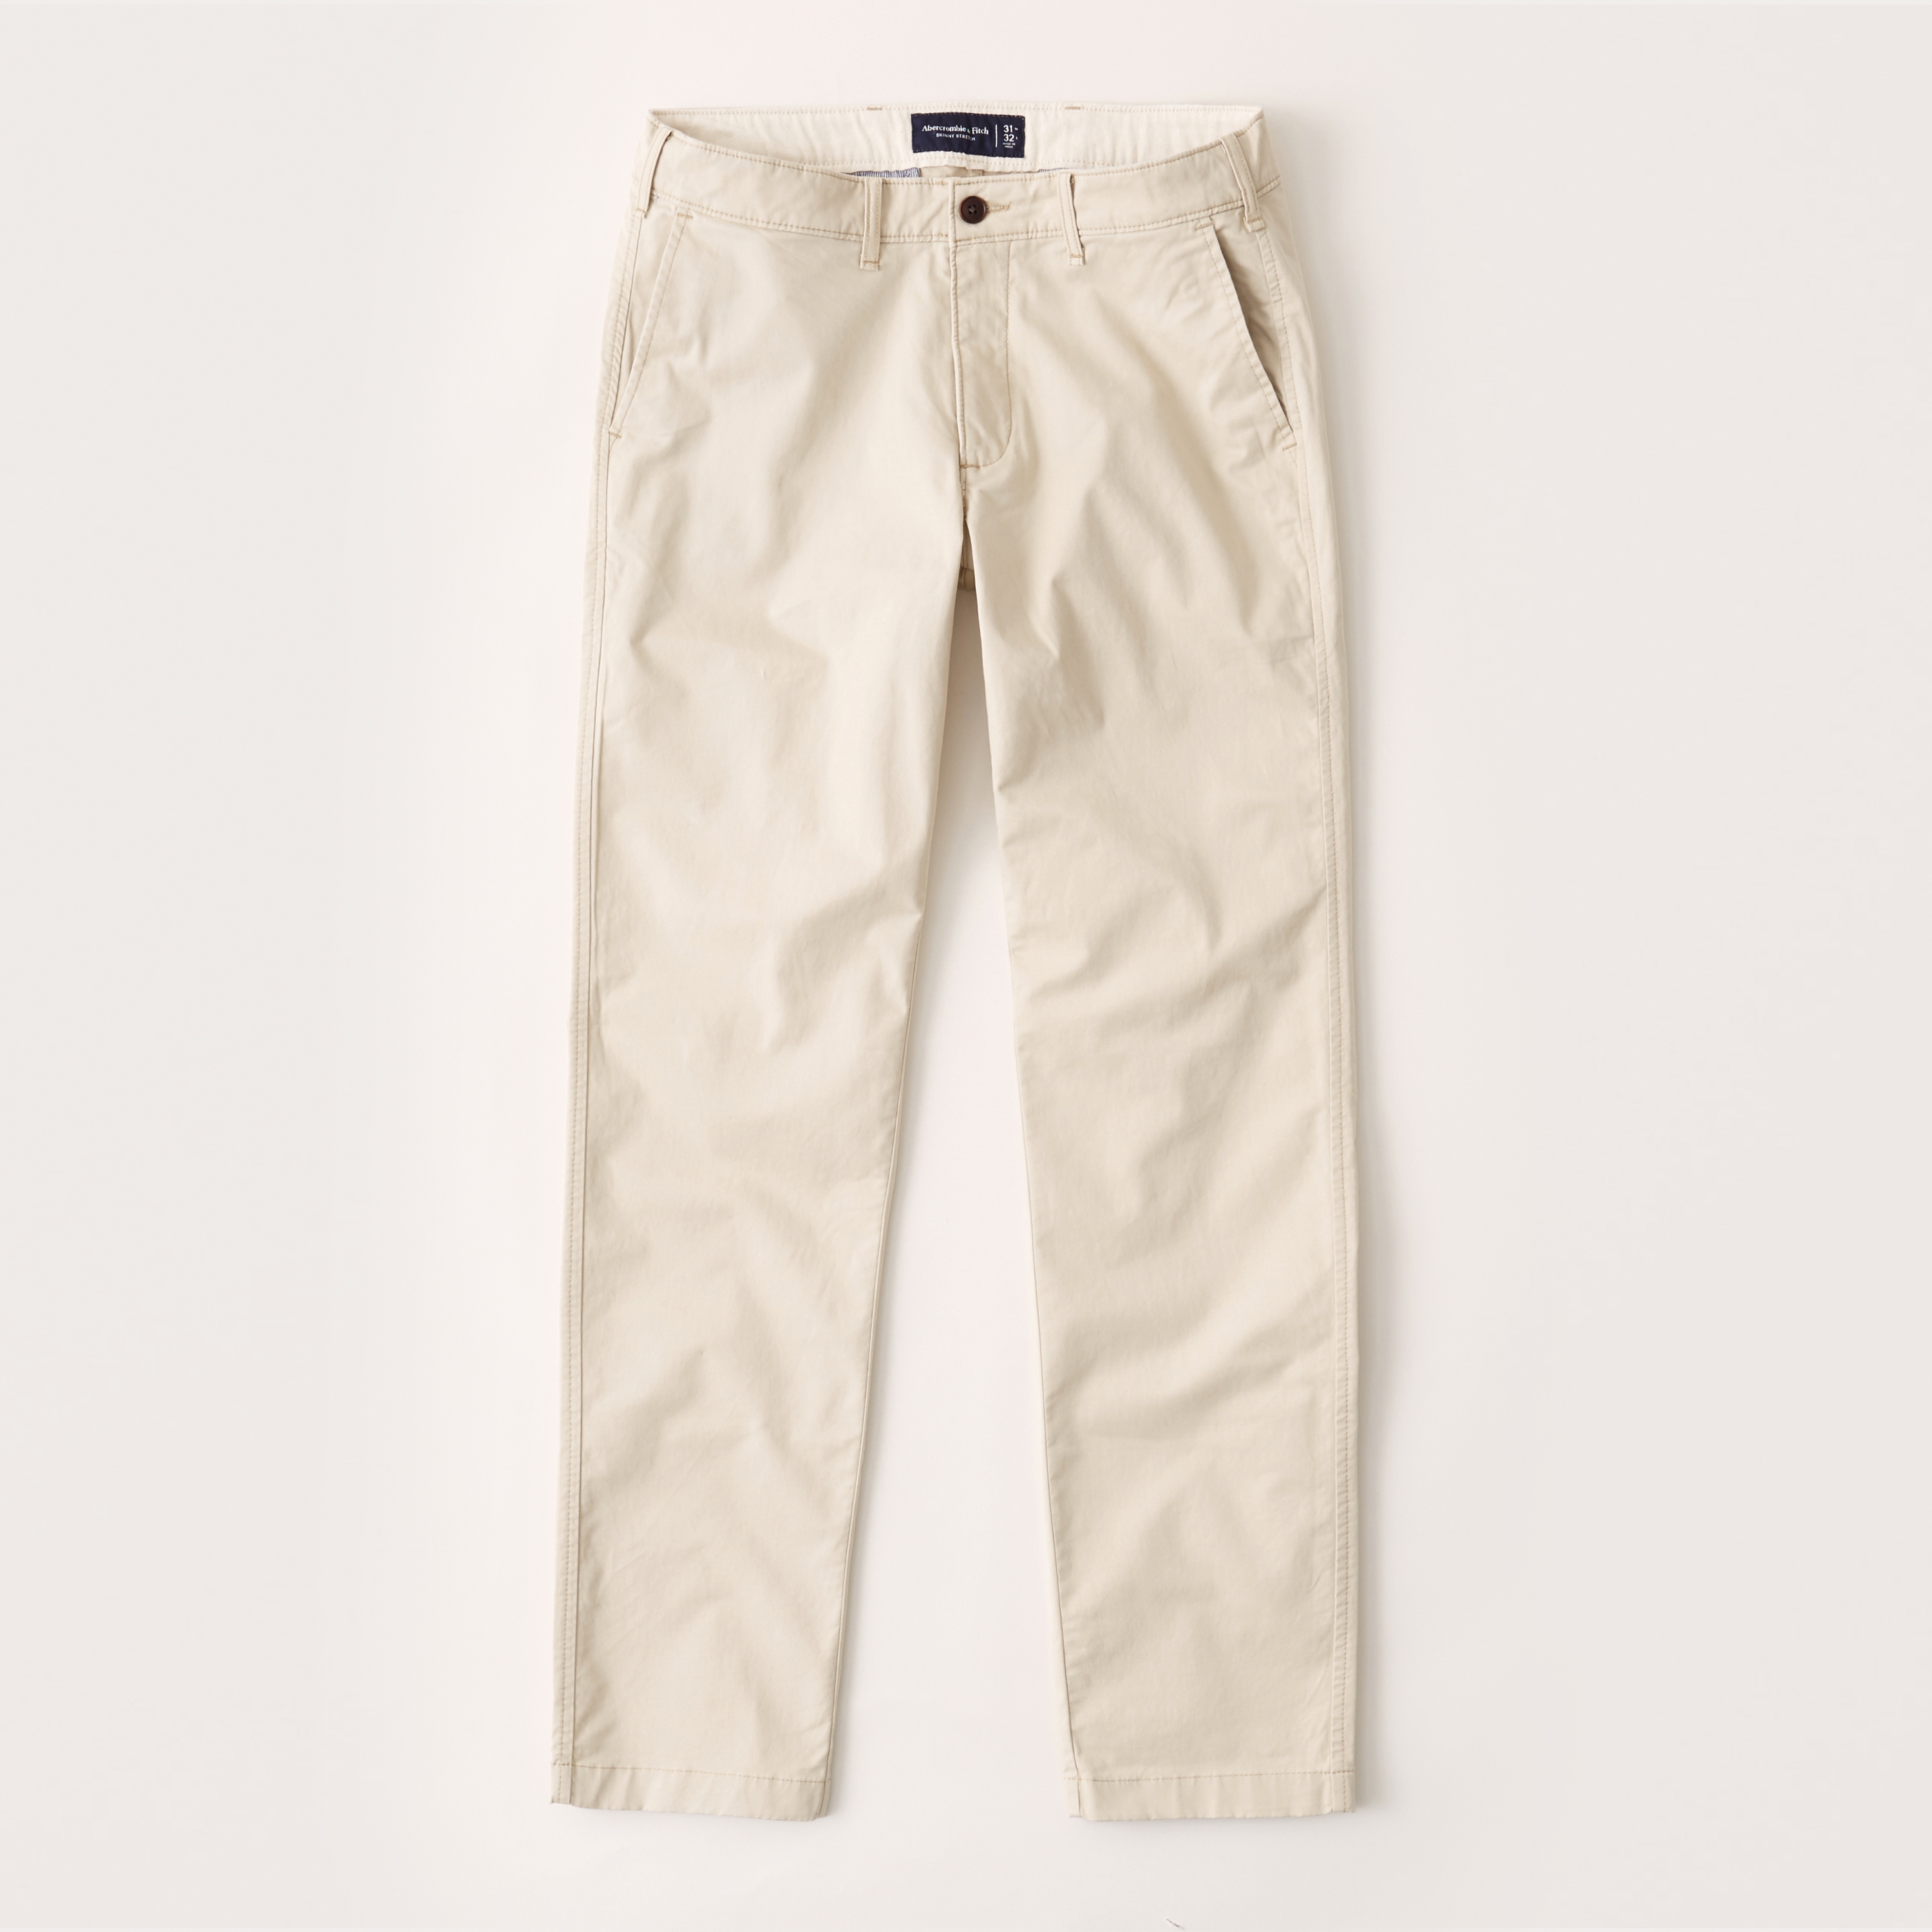 abercrombie and fitch chino pants